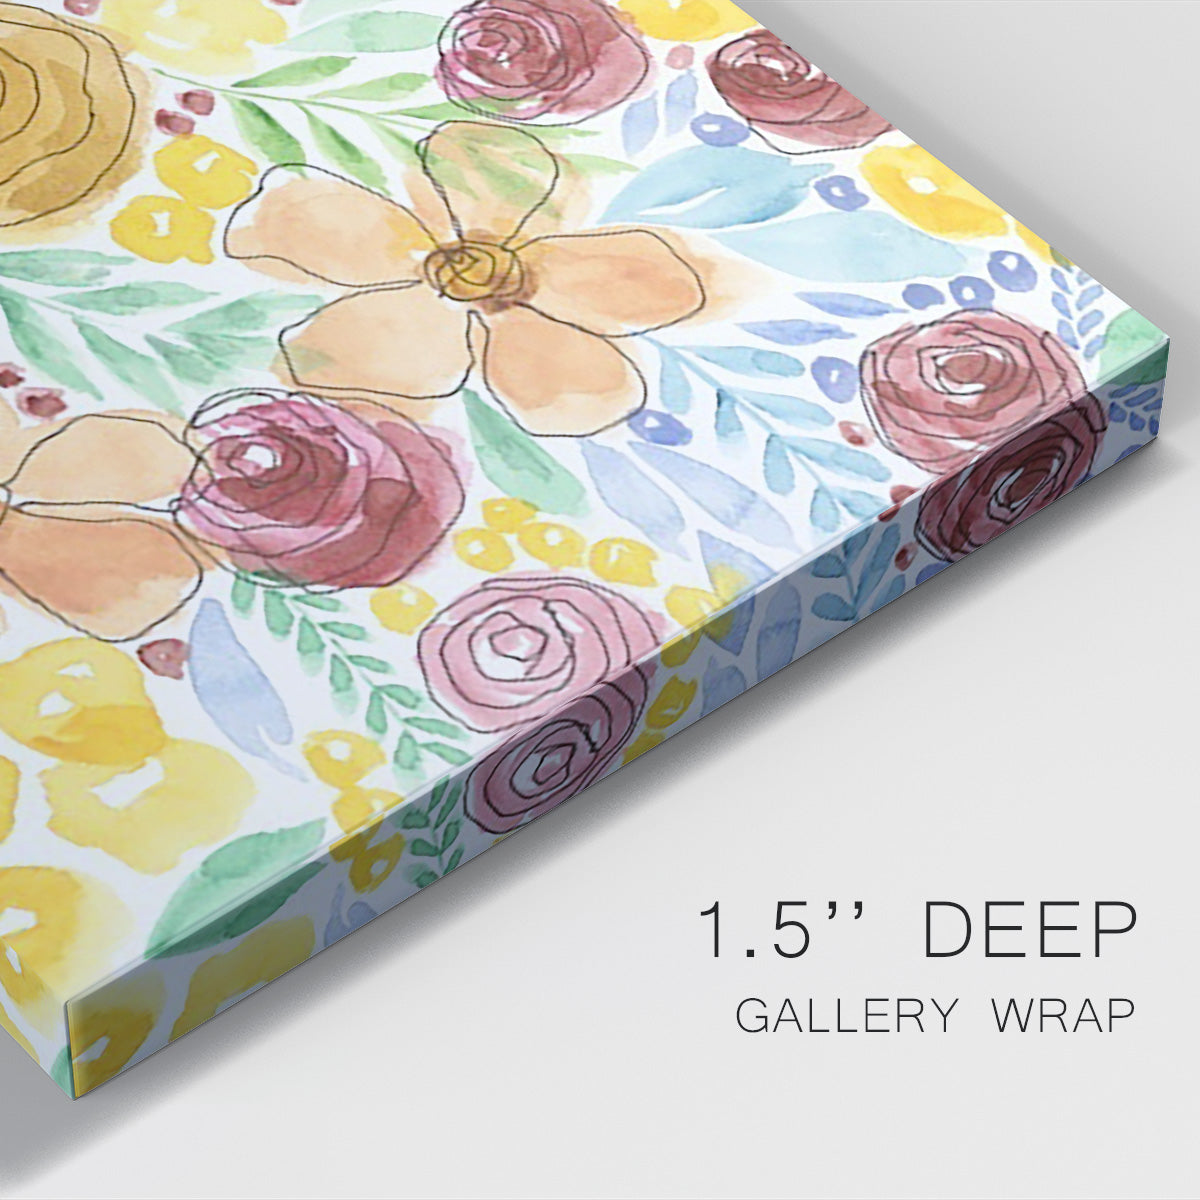 Flower Carousel I Premium Gallery Wrapped Canvas - Ready to Hang